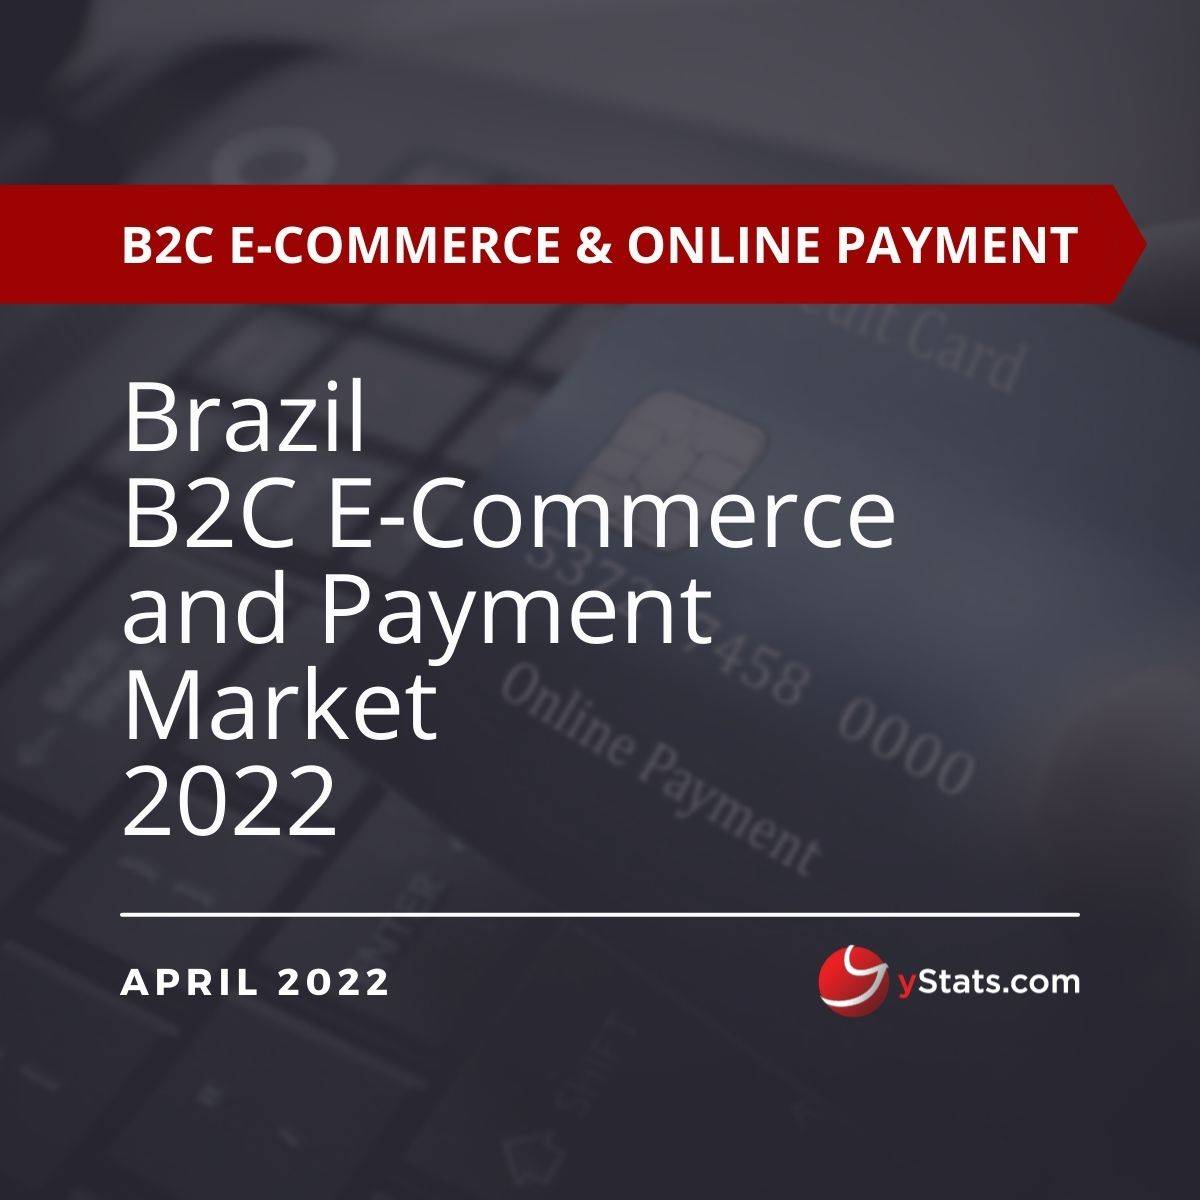 market report on brazil b2c e-commerce and payment market 2022